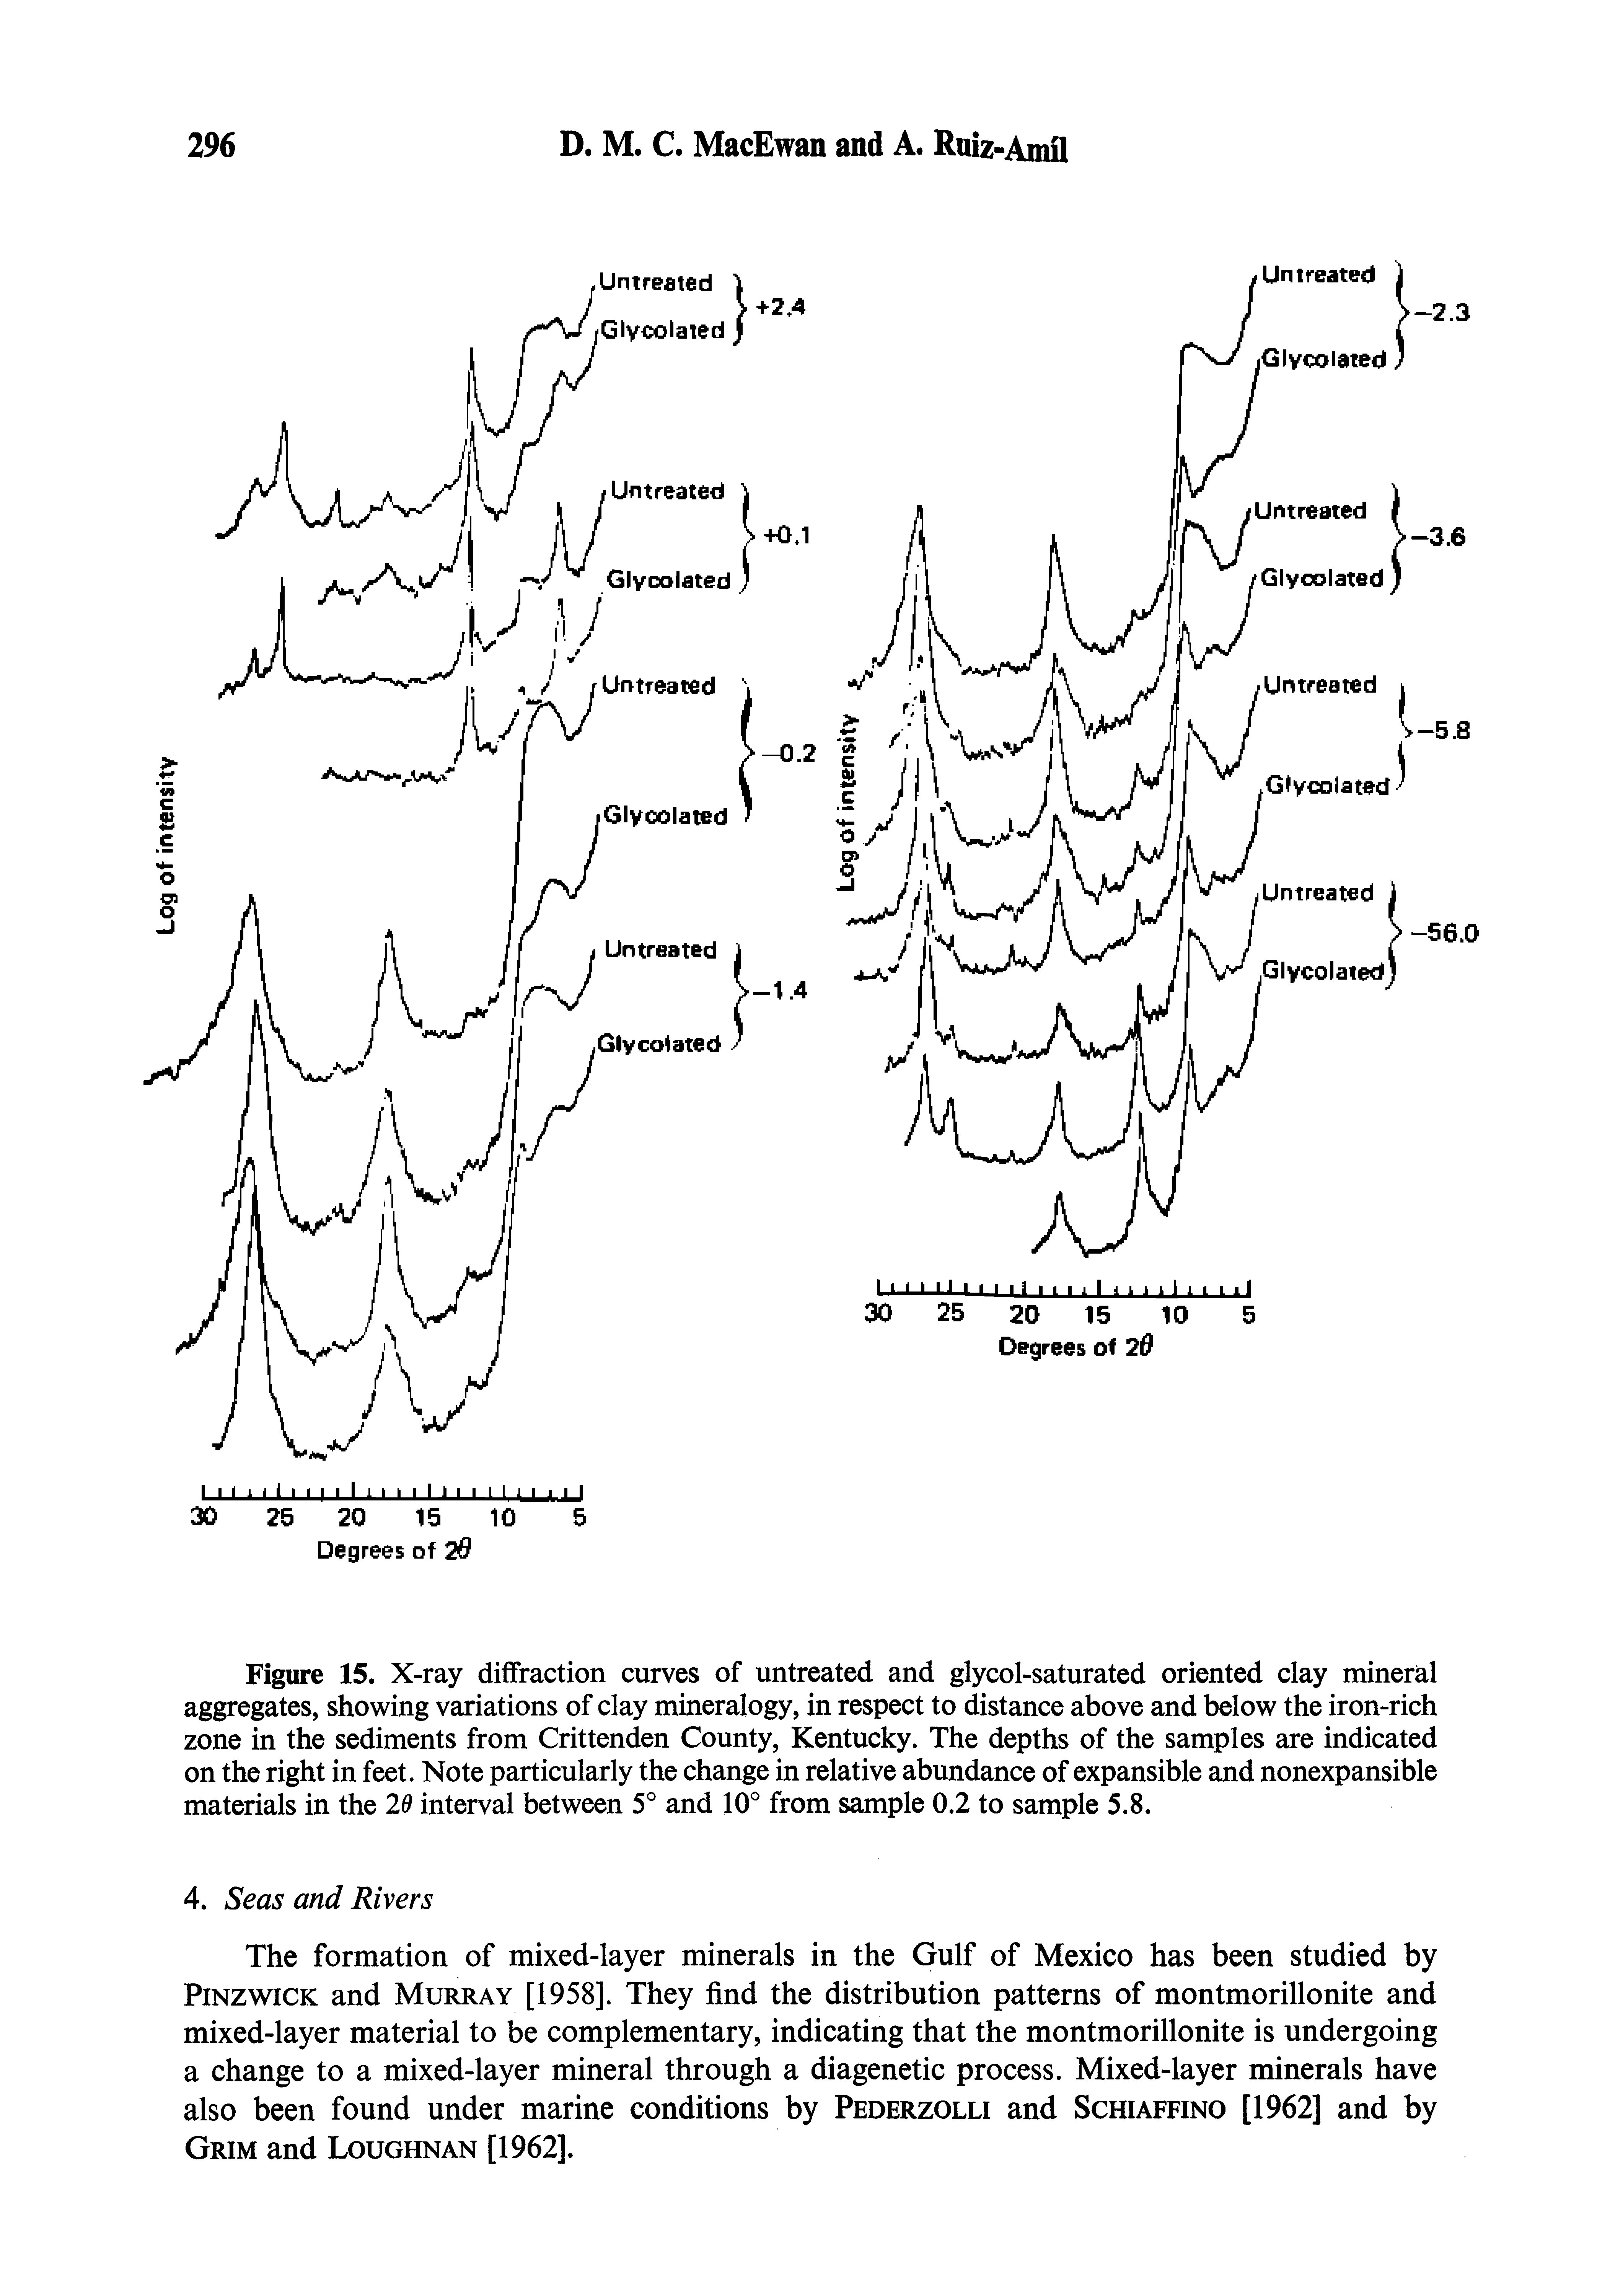 Figure 15. X-ray diffraction curves of untreated and glycol-saturated oriented clay mineral aggregates, showing variations of clay mineralogy, in respect to distance above and below the iron-rich zone in the sediments from Crittenden County, Kentucky. The depths of the samples are indicated on the right in feet. Note particularly the change in relative abundance of expansible and nonexpansible materials in the 2d interval between 5° and 10° from sample 0.2 to sample 5.8.